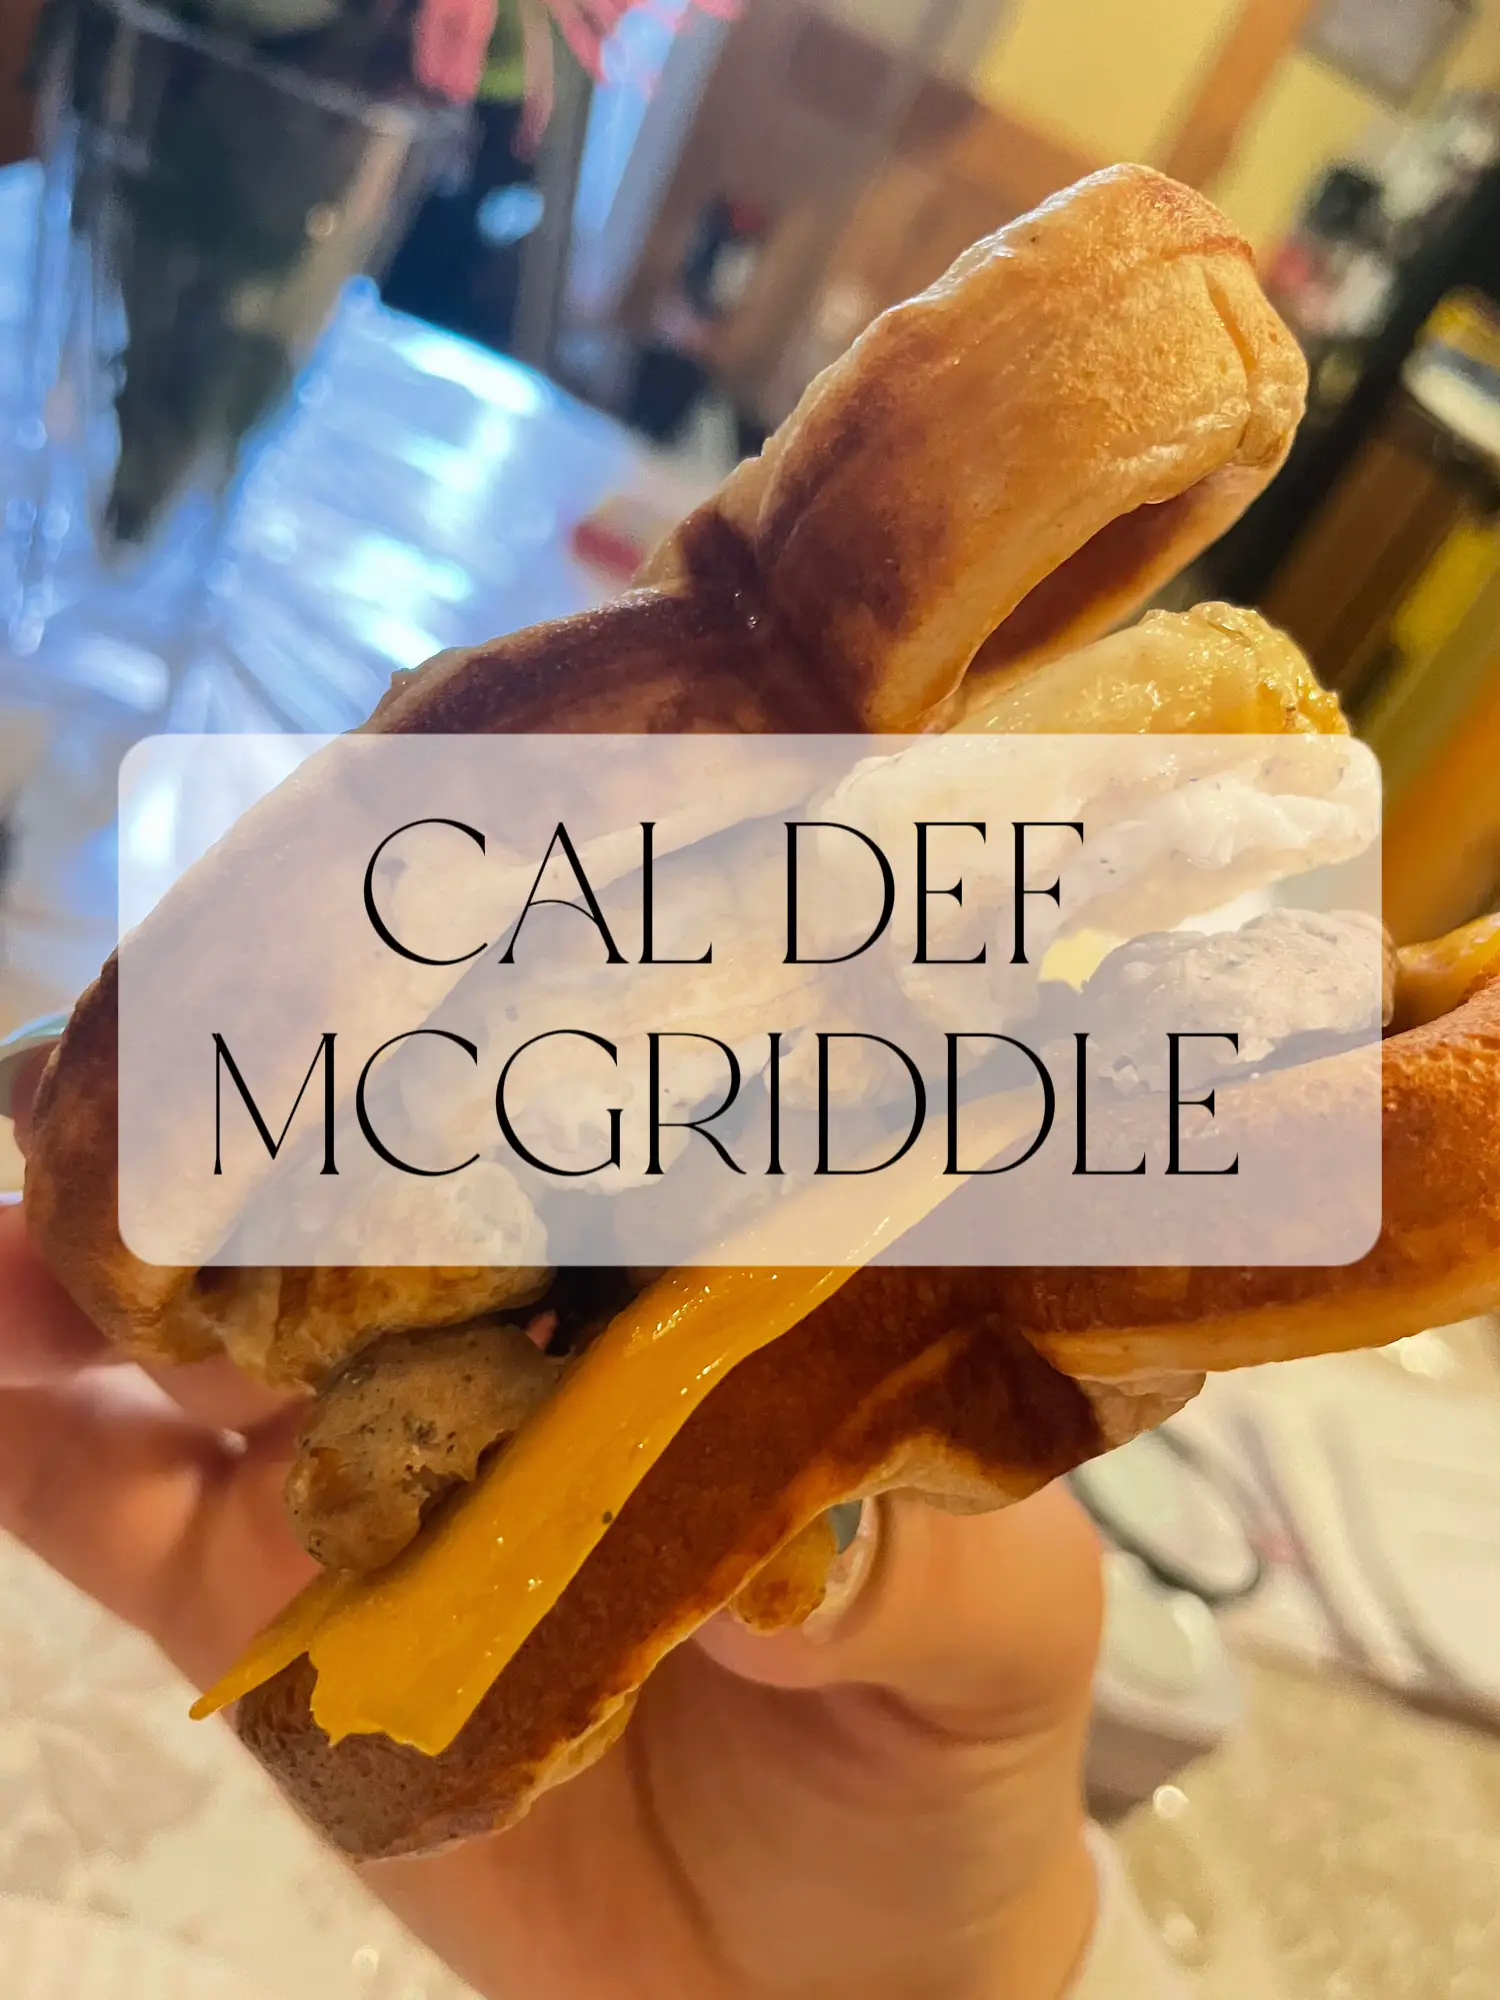 Cal def Mcgriddle! 😋, Gallery posted by becky